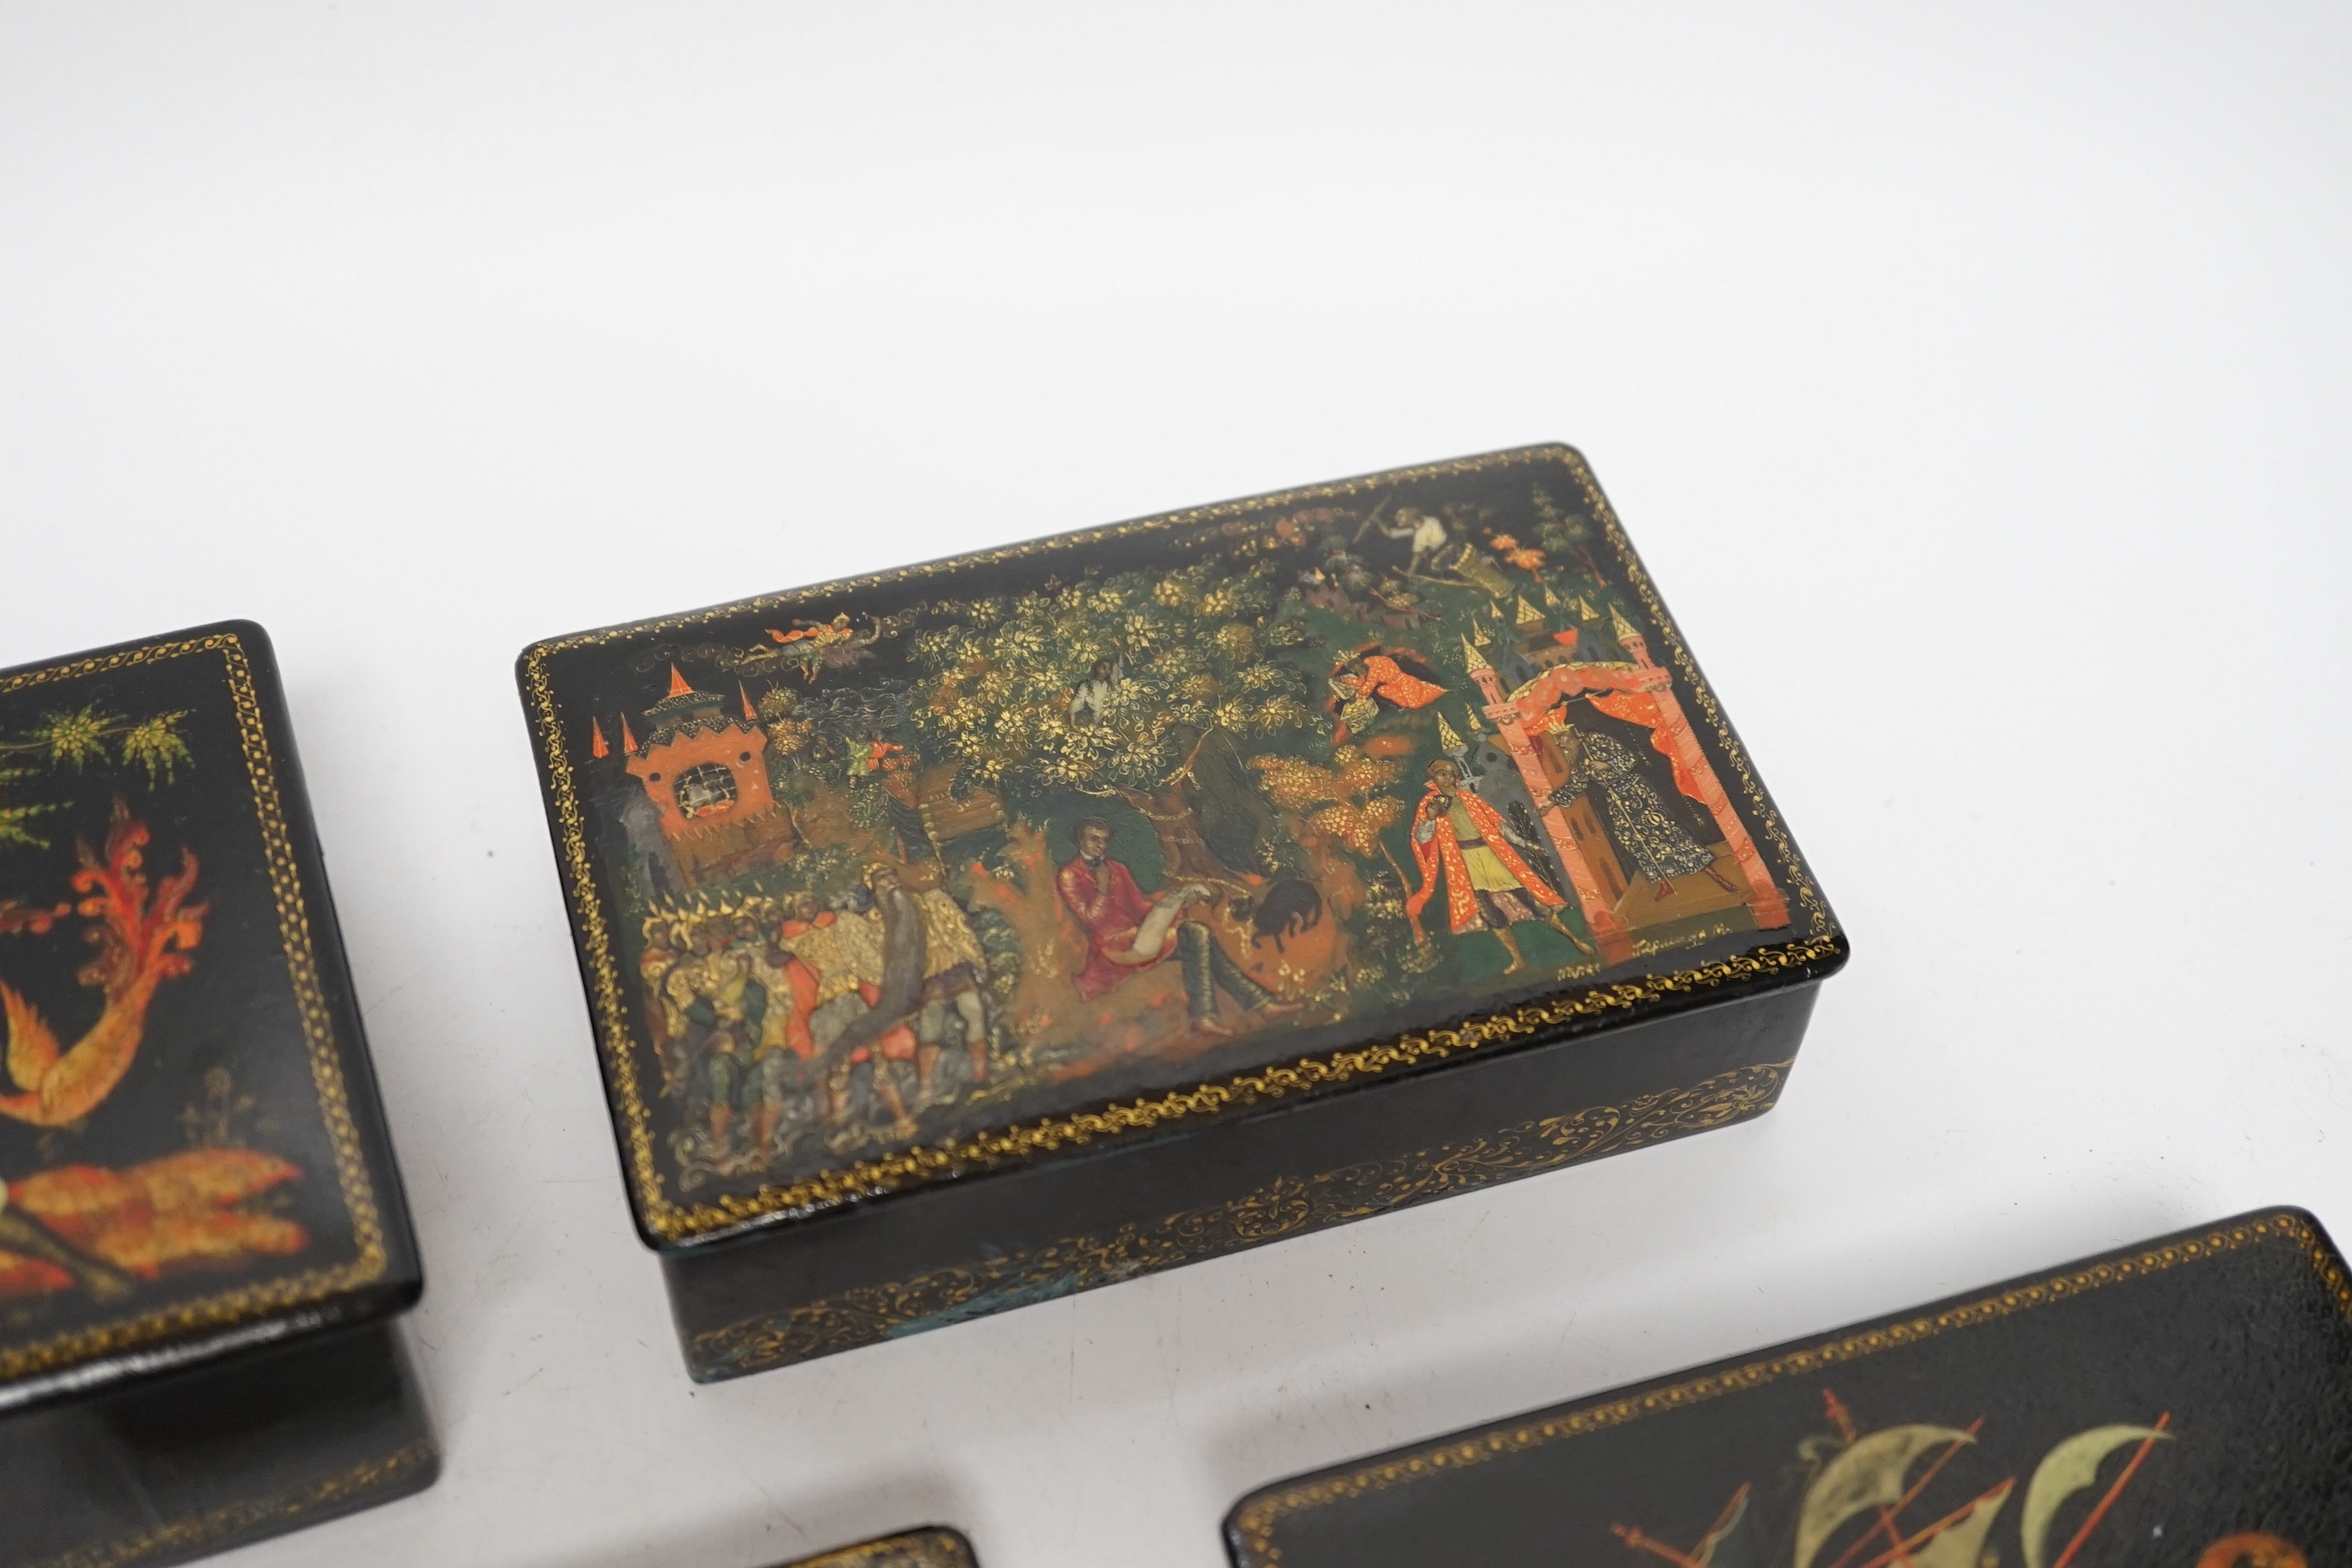 Five Russian Palekh lacquer table boxes, each painted with figures from legend, each signed by the artist, the largest 17 cm wide